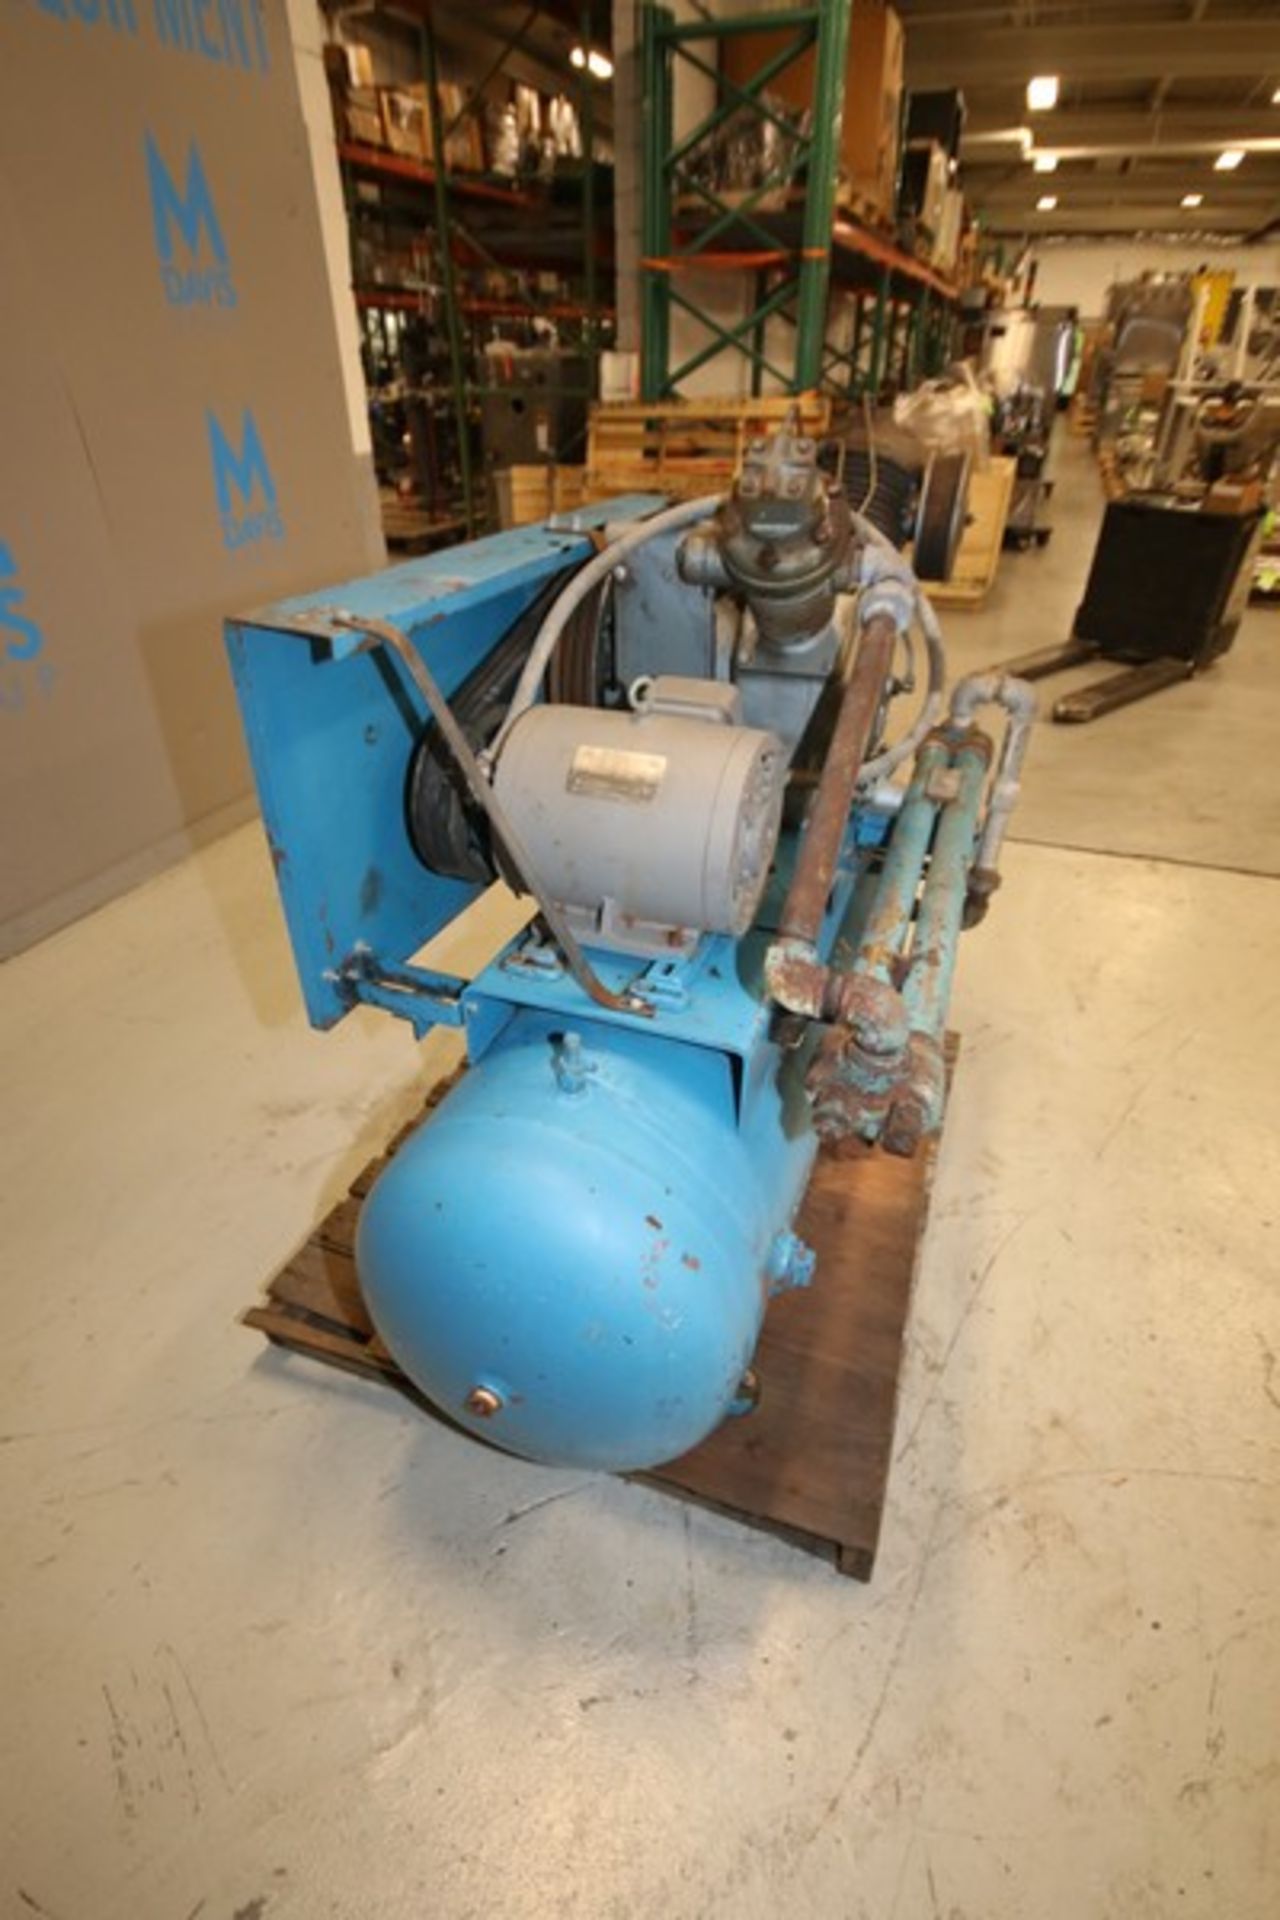 Ingersoll Rand 10 hp Reciprocating Air Compressor, Model 71T4, SN 276537, 1740 rpm, 230/460V, - Image 7 of 7